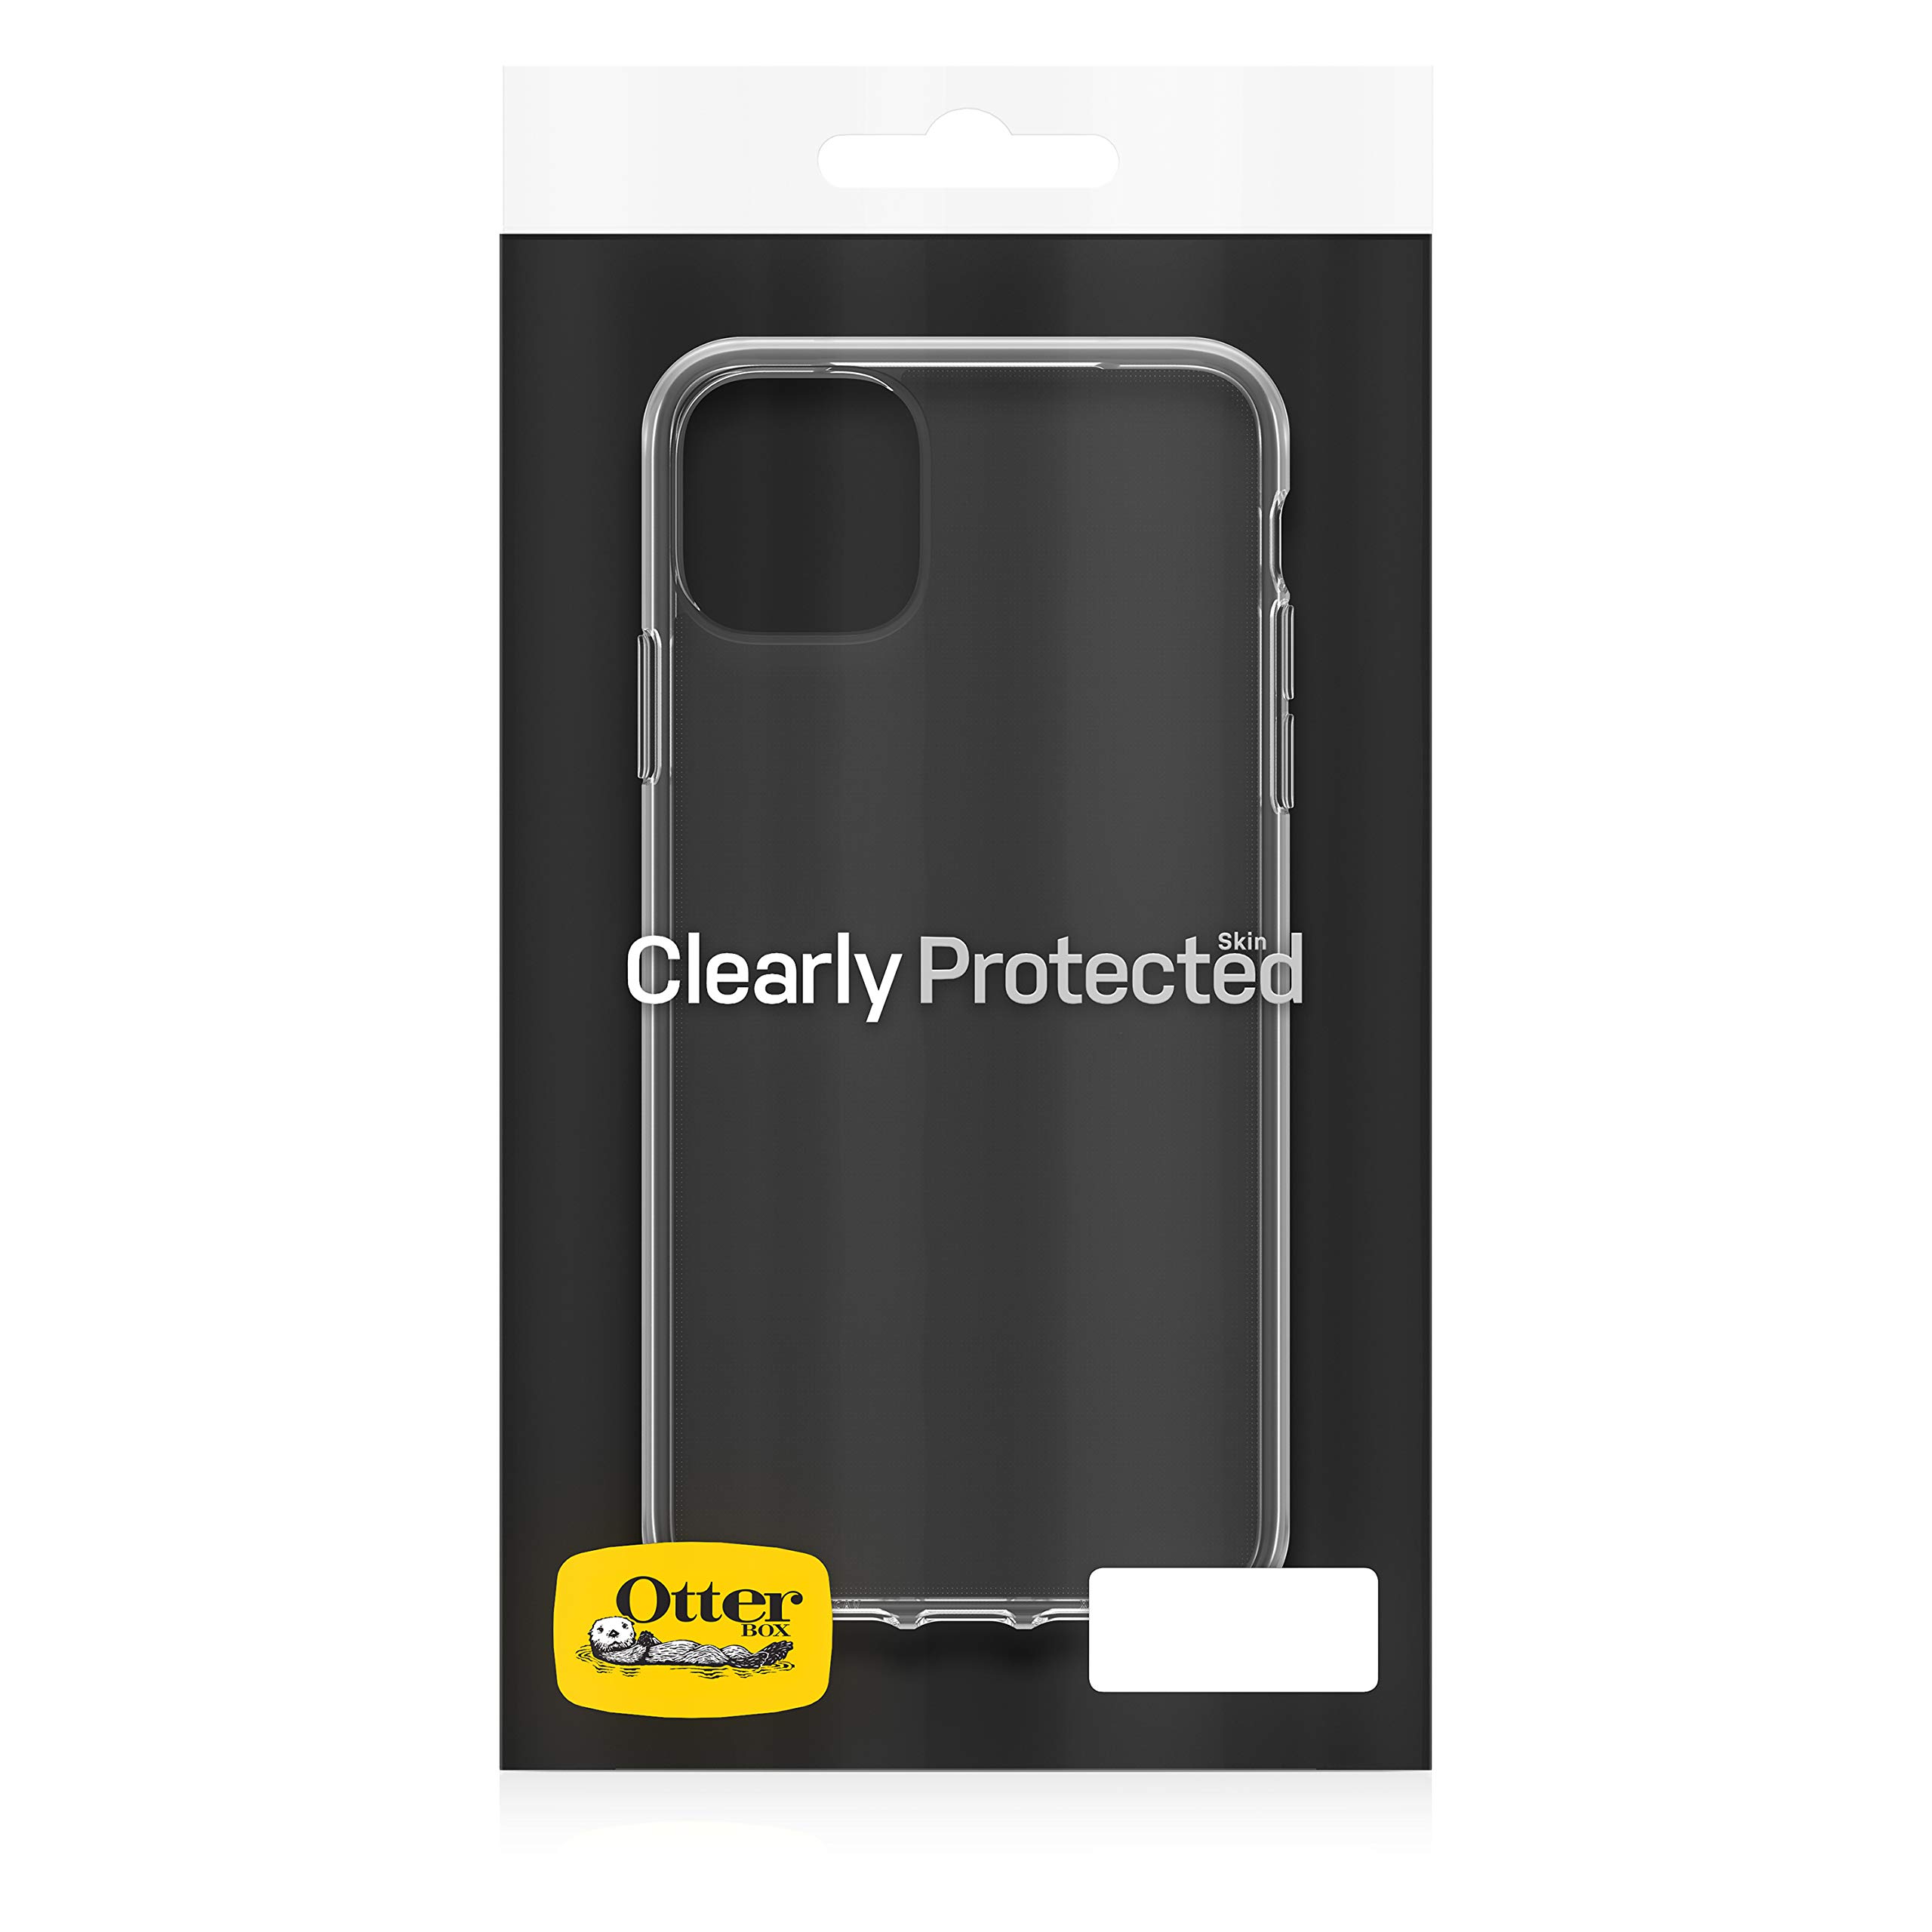 OTTERBOX CLEARLY PROTECTED